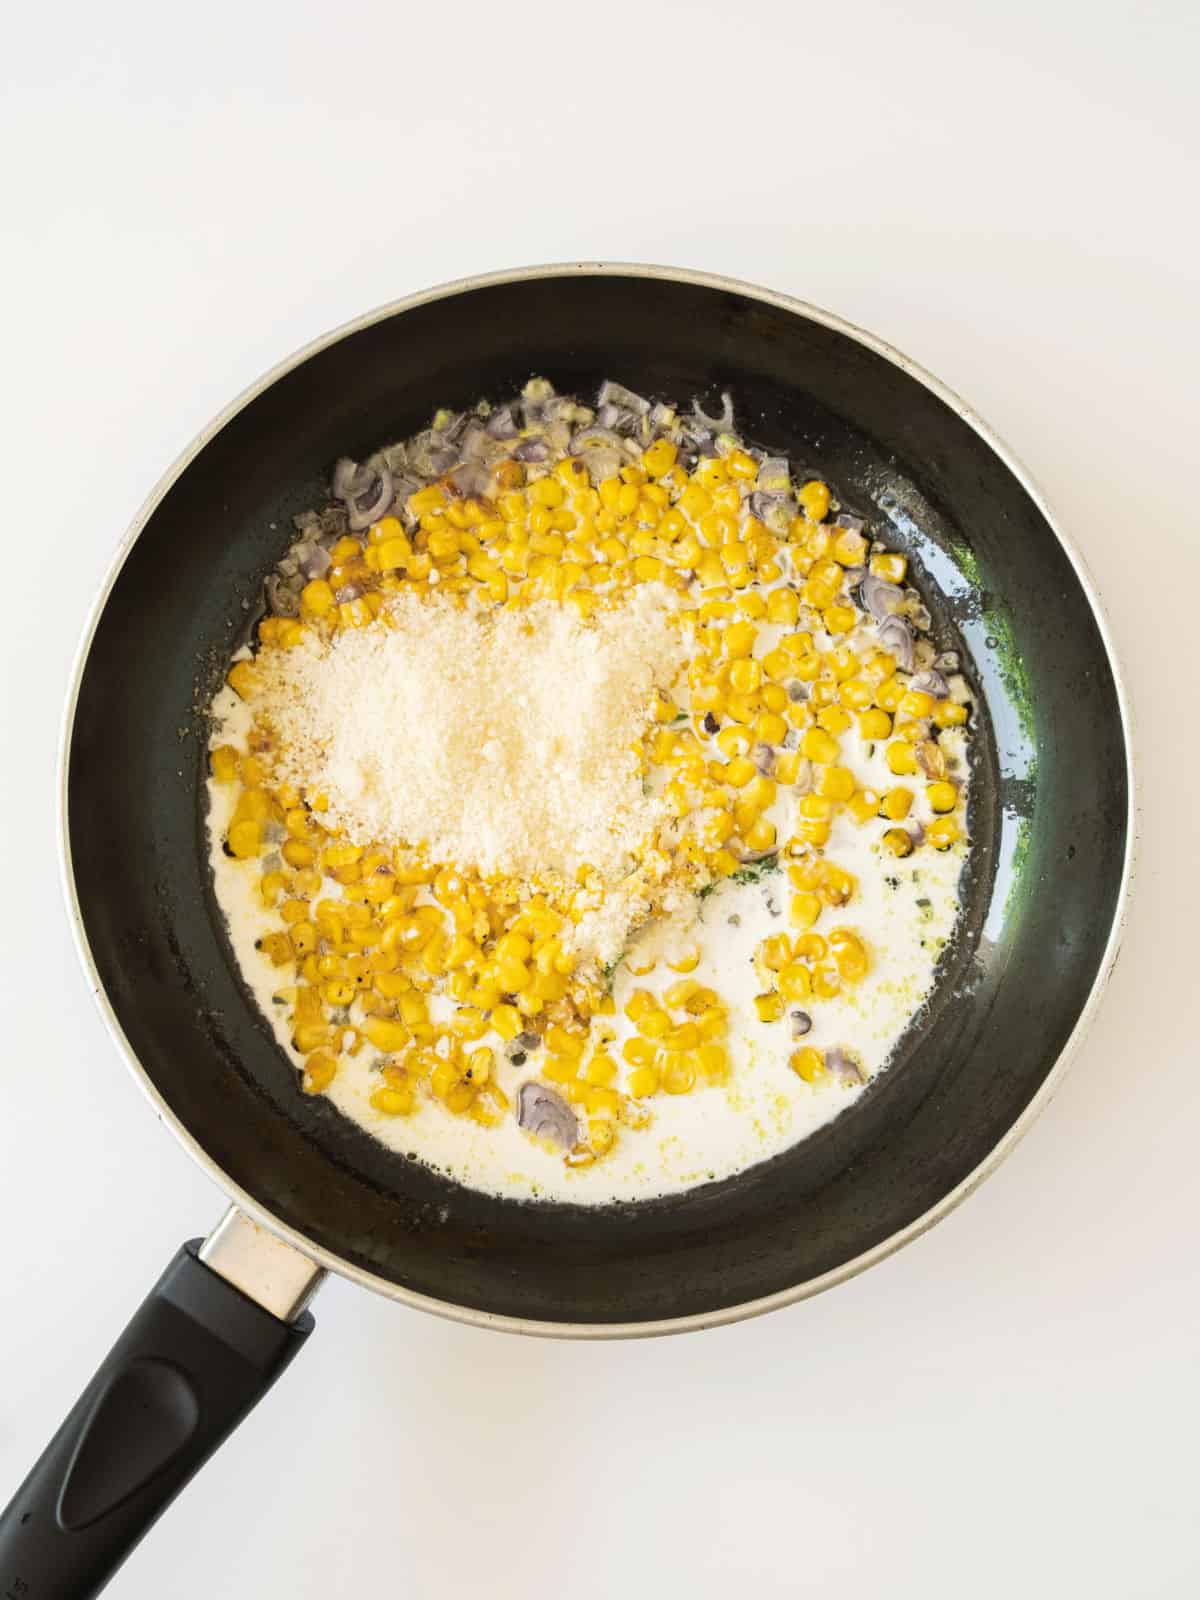 Cream, cheese and corn in a black skillet. Whitish surface.